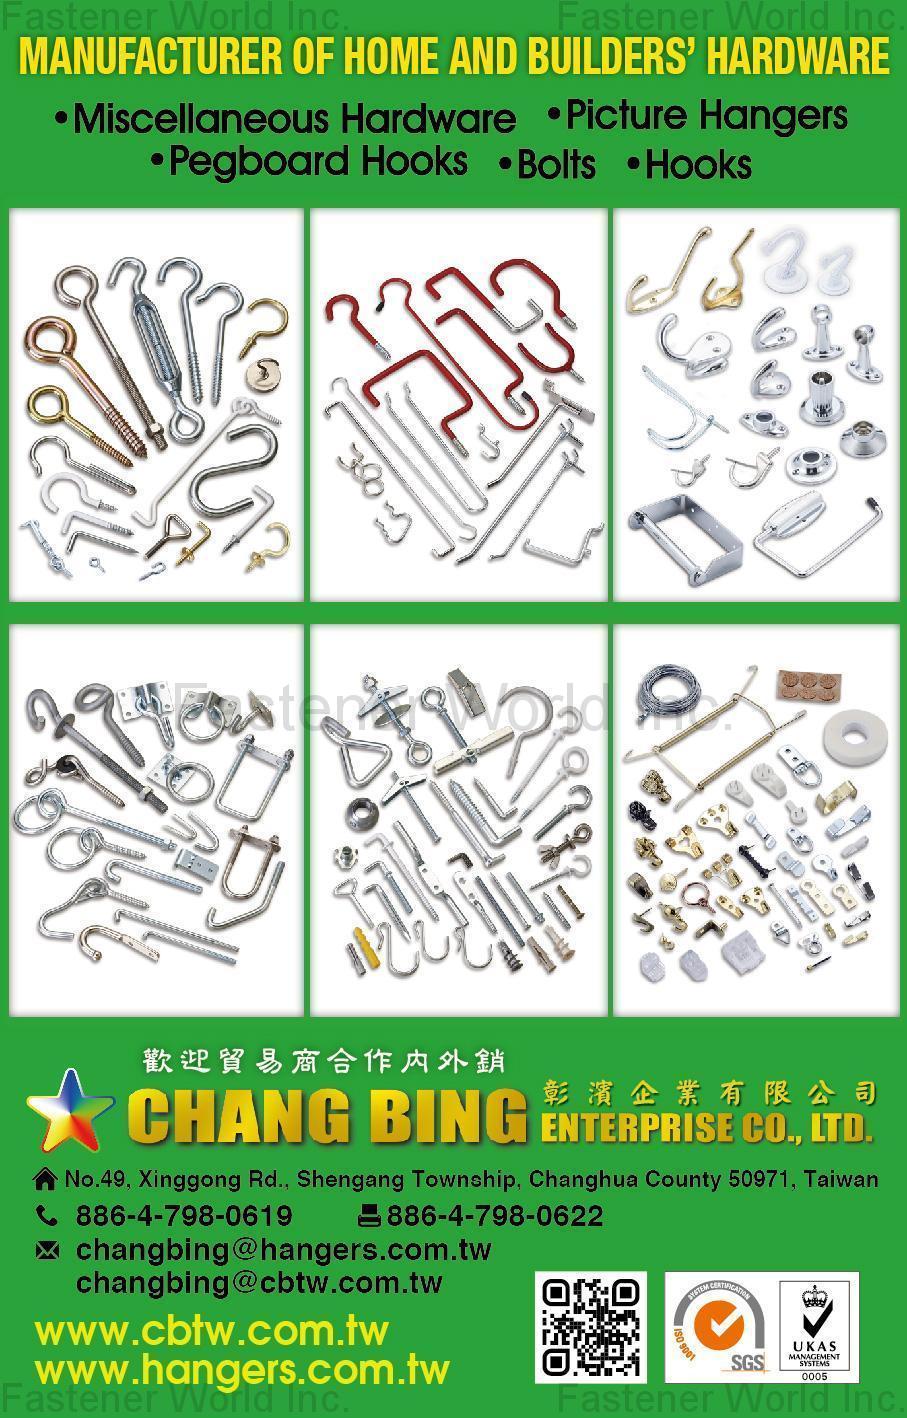 CHANG BING ENTERPRISE CO., LTD. , Home and Builders' Hardware, Miscellaneous Hardware, Picture, Pegboard, Bolts, Hooks